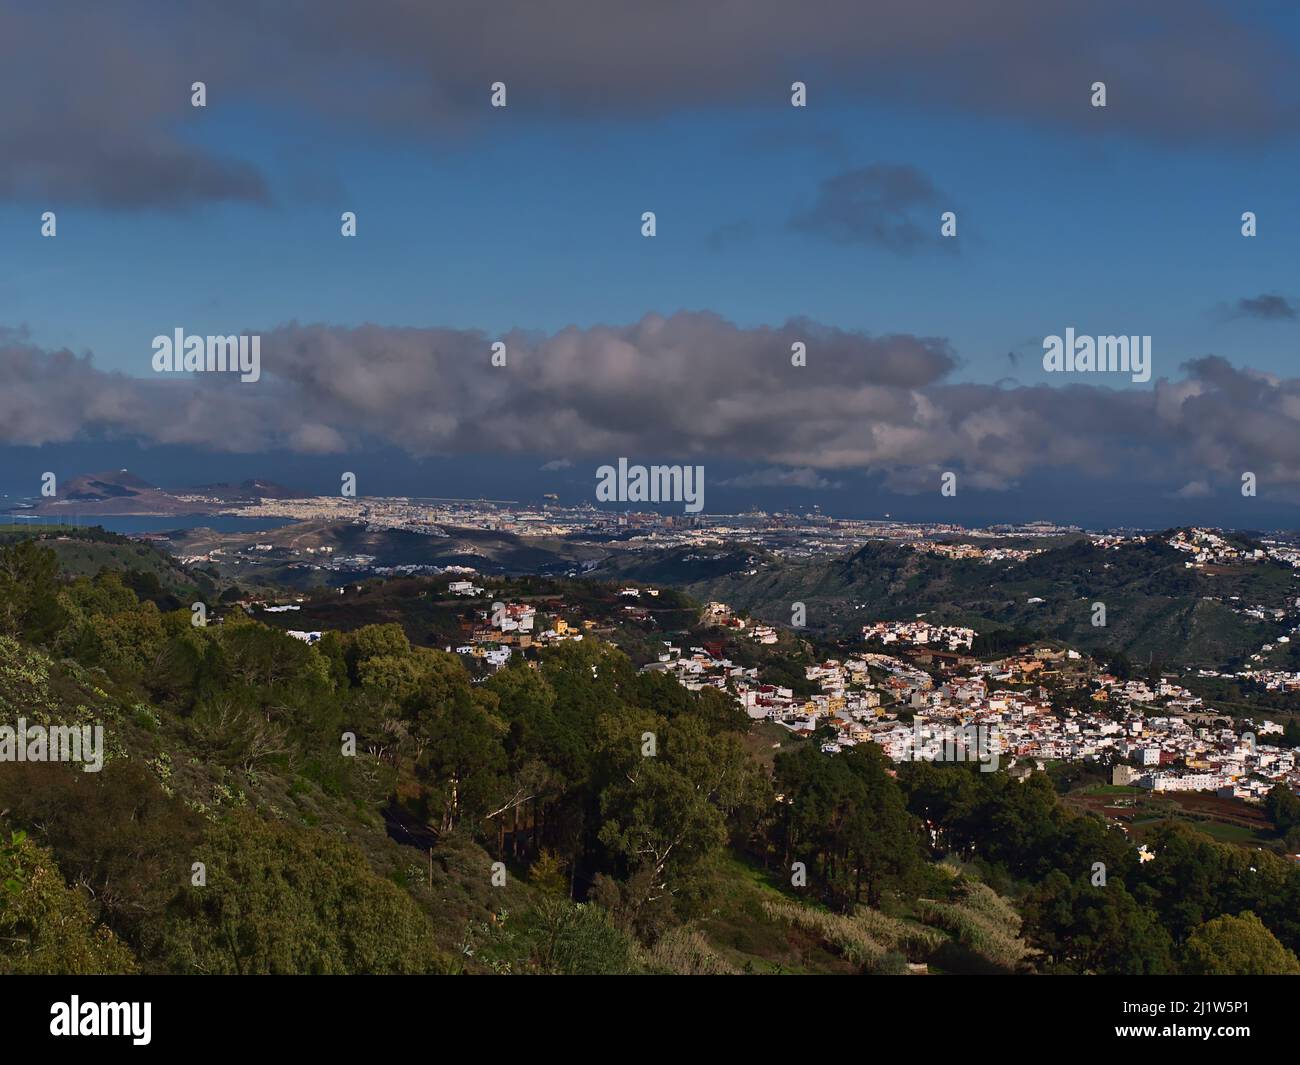 View over the northeast of island Gran Canaria, Spain with small village Teror surrounded by green hills and capital city Las Palmas in background. Stock Photo